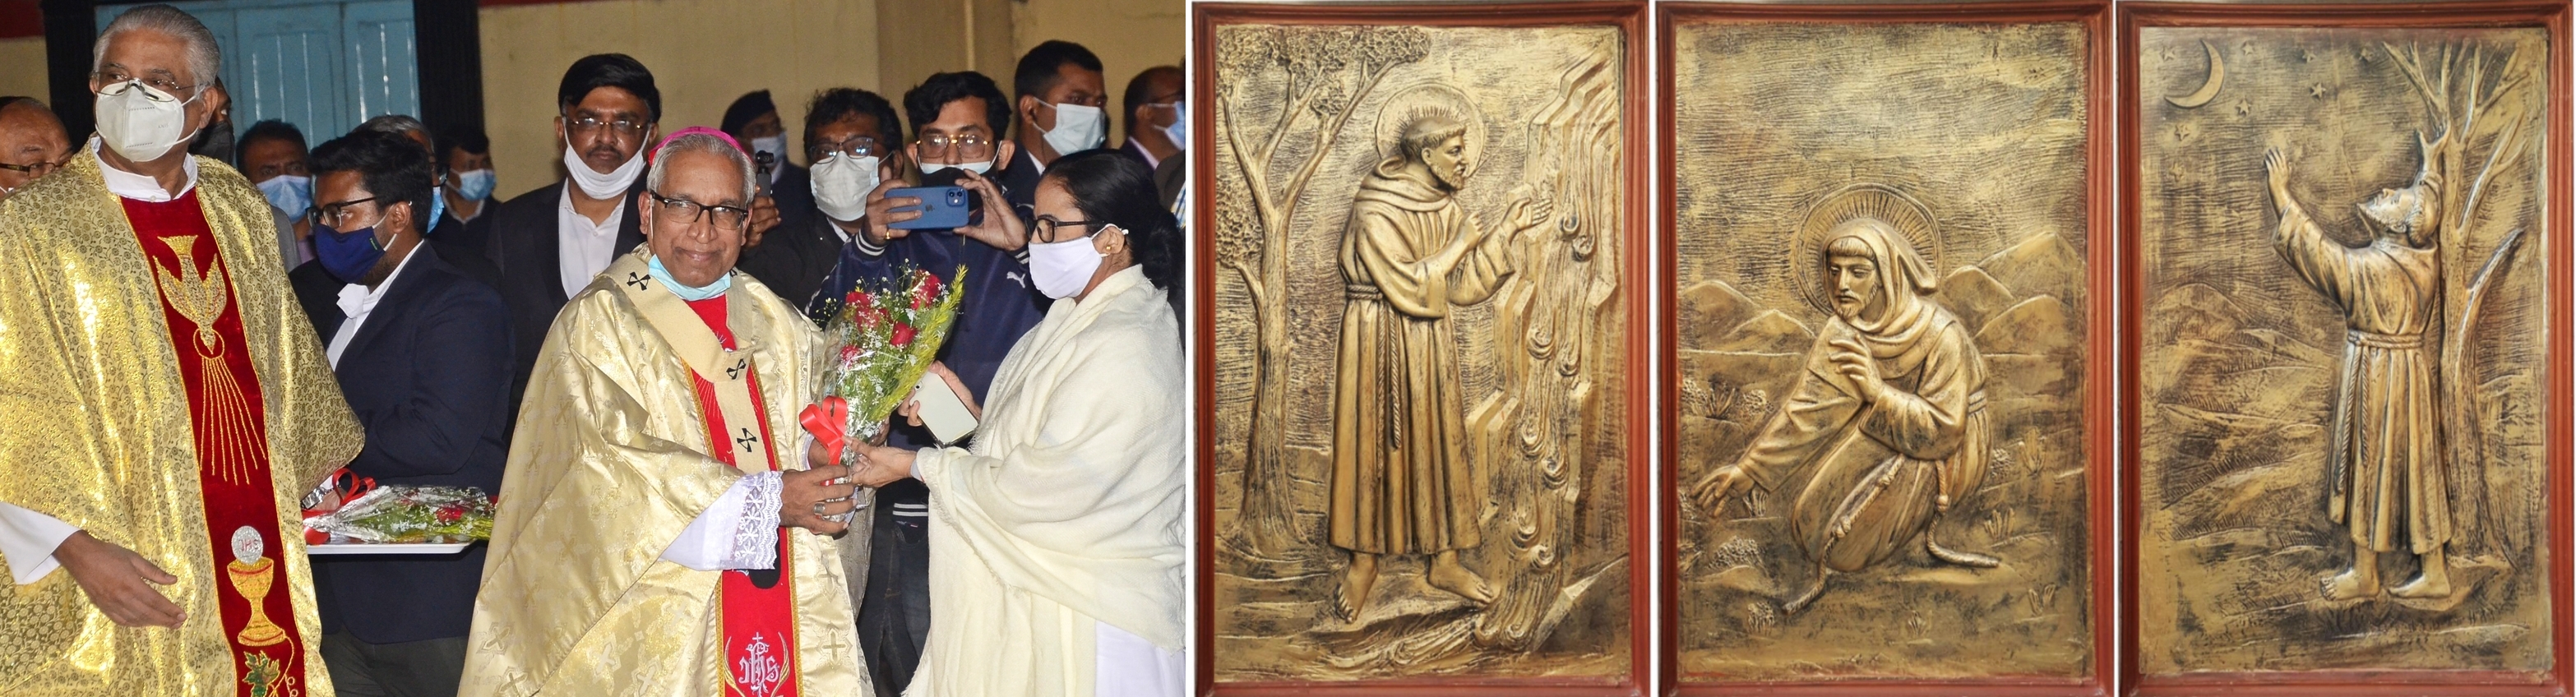 Chief Minister inaugurates special exhibition; faithful gear up for a green Christmas